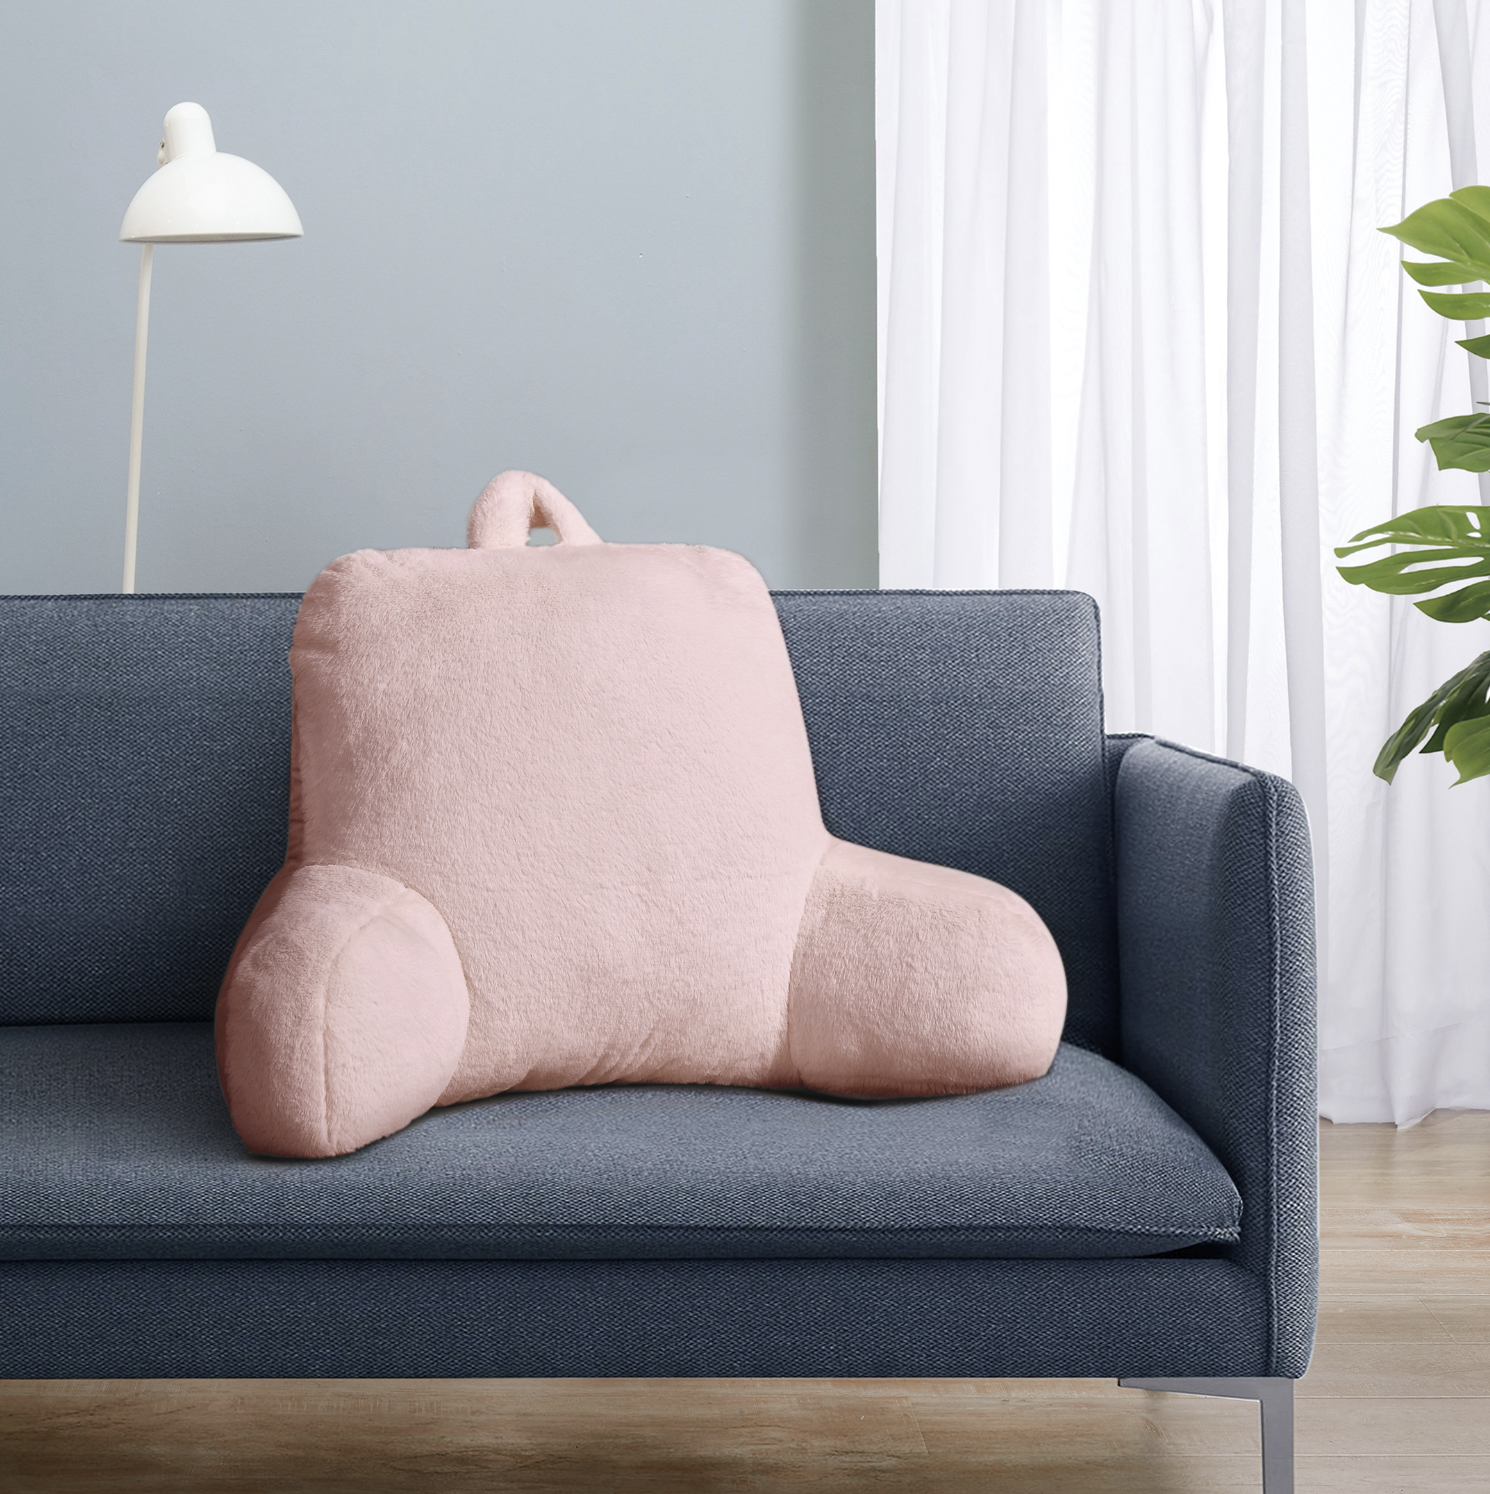 the pink bedrest pillow on a couch